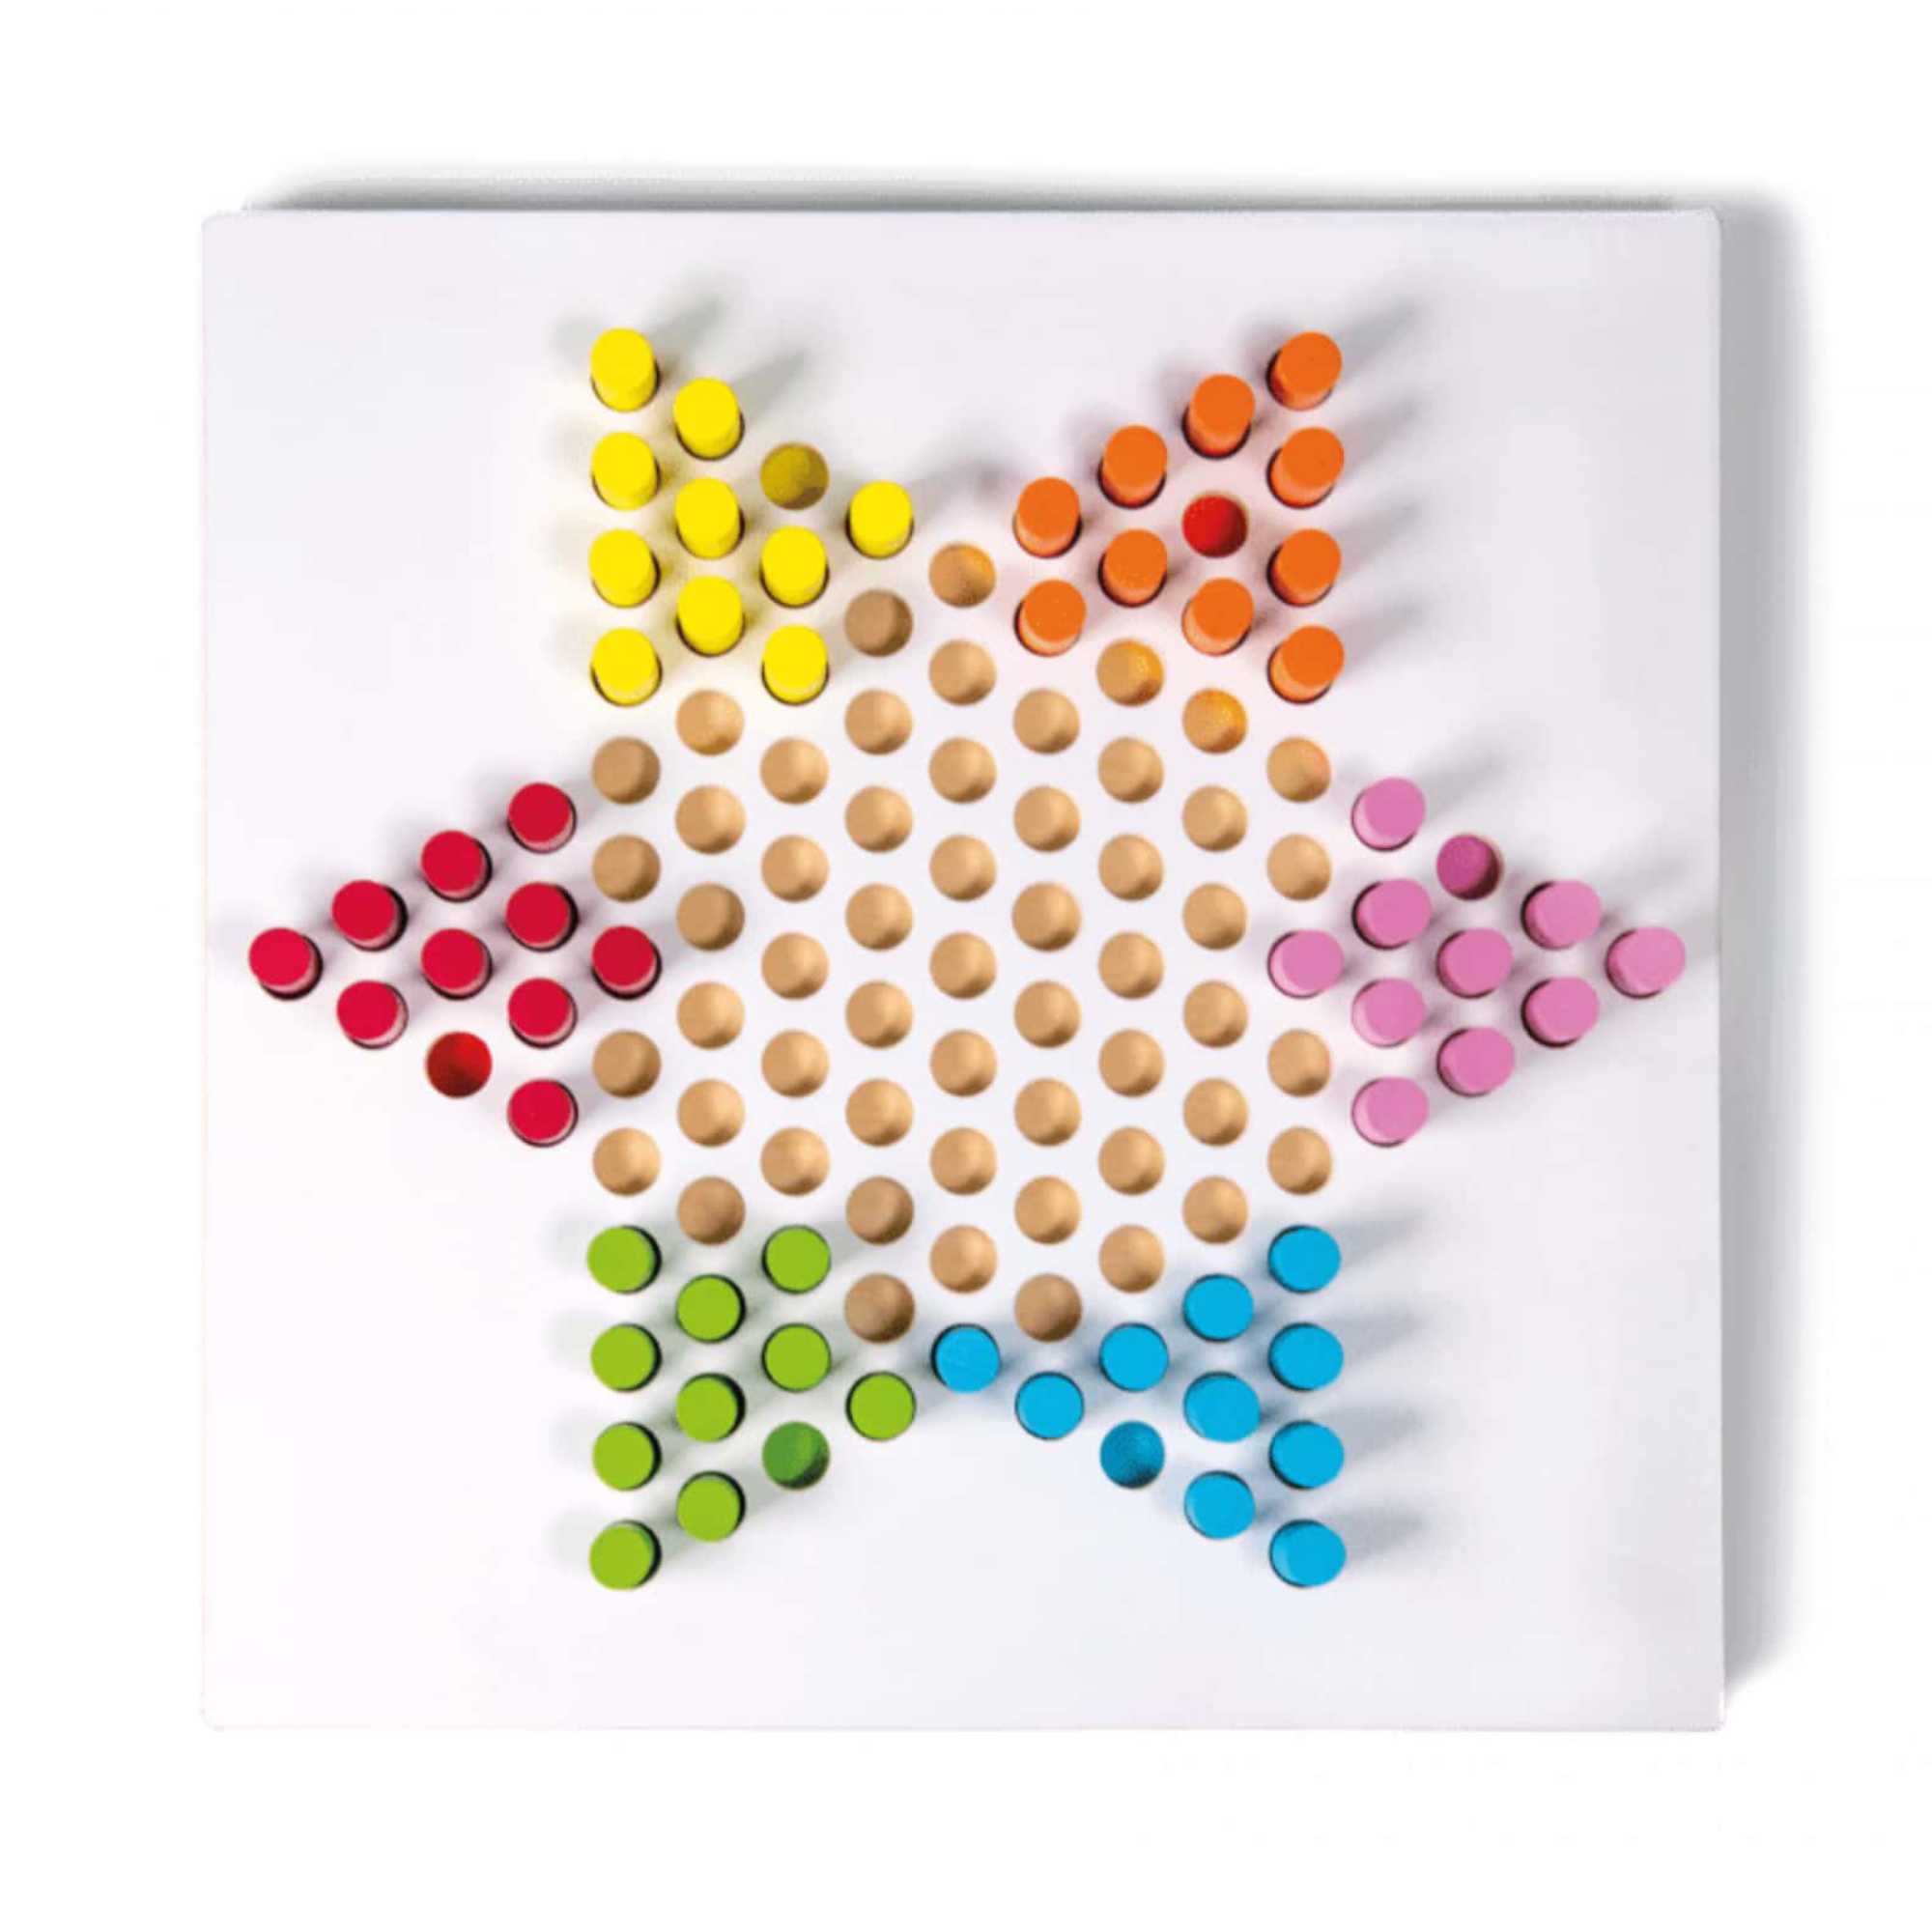 Remember Halma Chinese Checkers